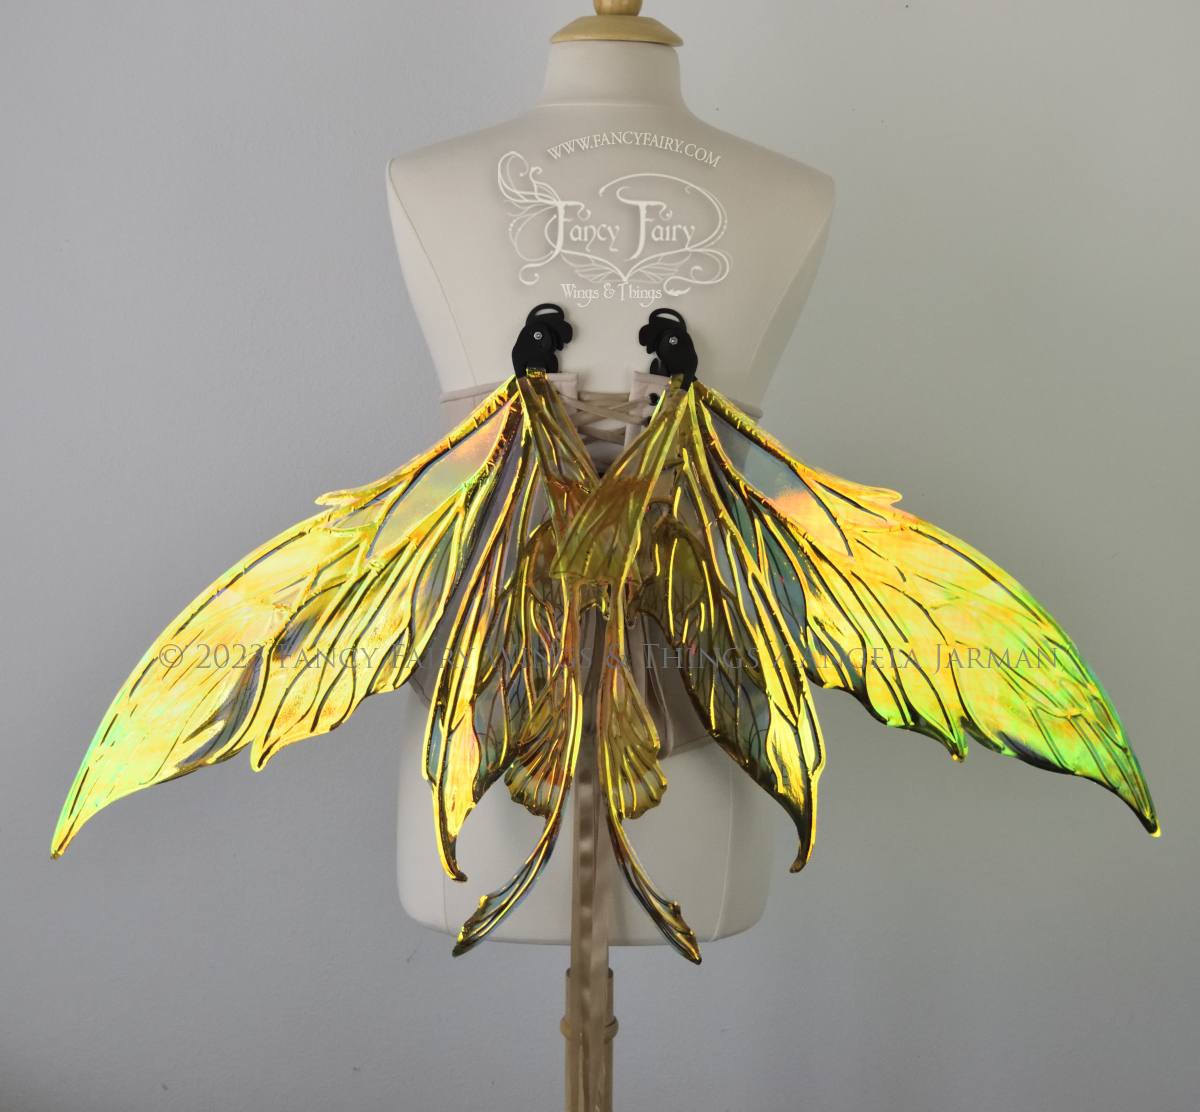 Back view of large green, gold & black painted iridescent fairy wings with black veins. Upper panels are elongated with pointed tips, a ‘tail’, lots of vein detail, in resting position